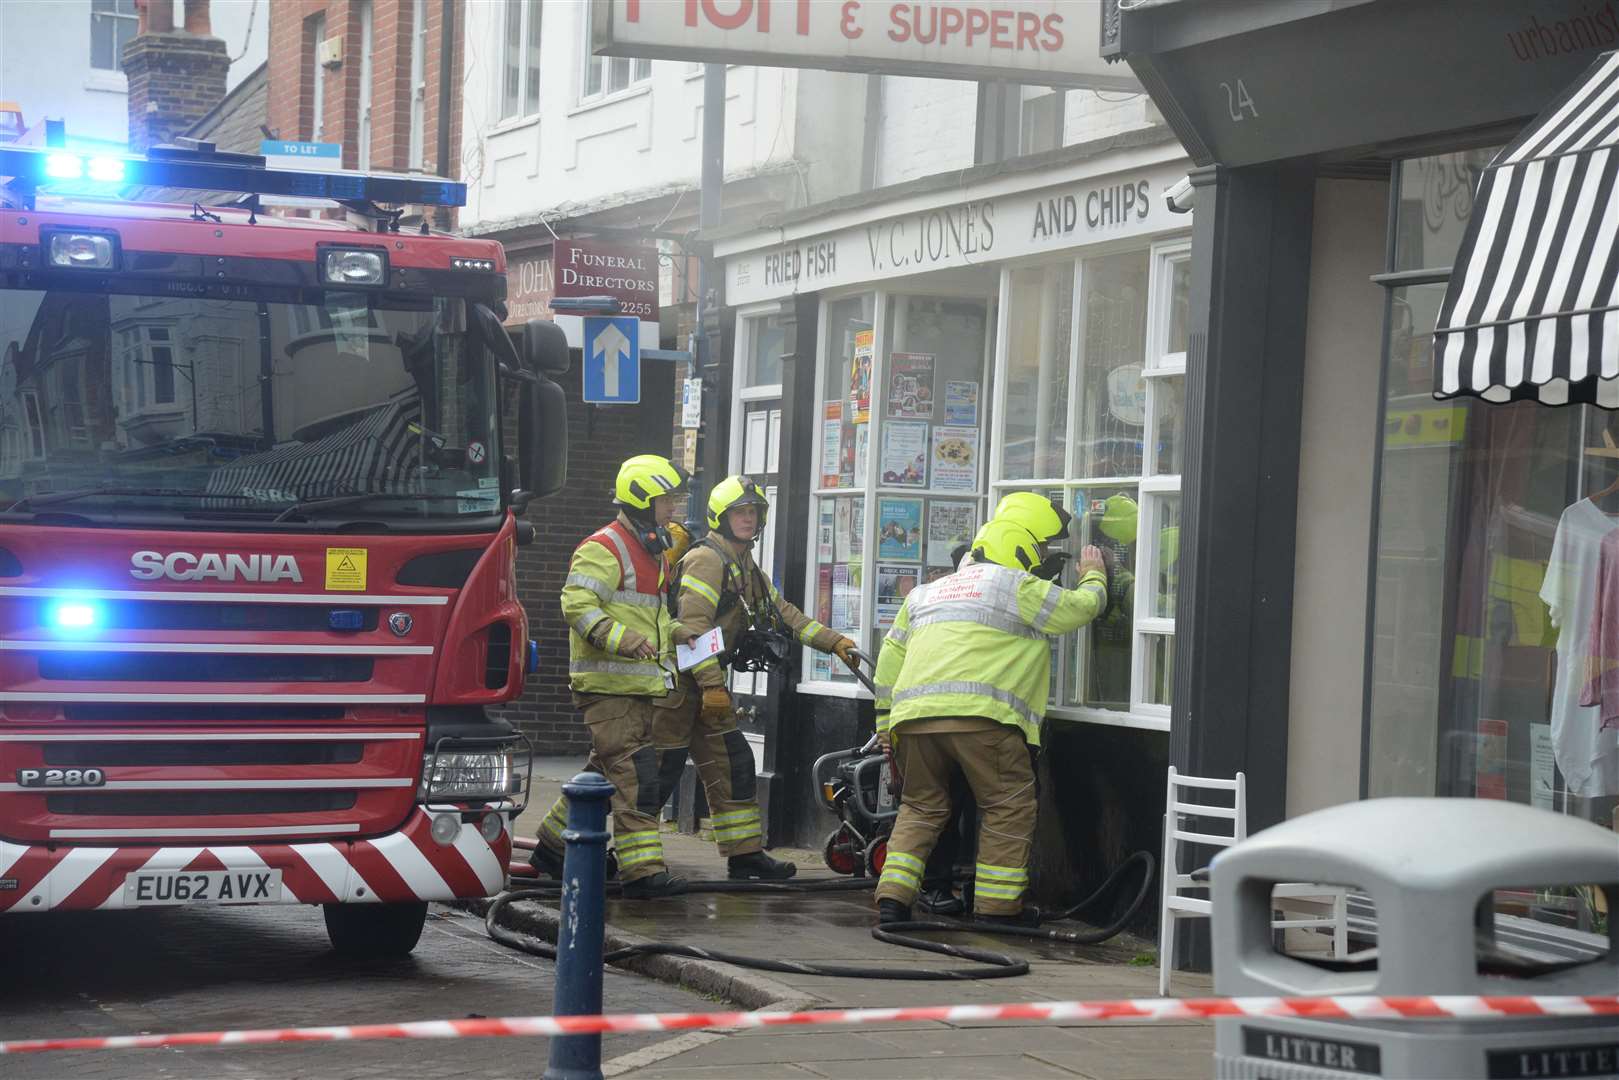 The scene in Harbour Street, Whitstable following a fire at VC Jones fish and chip shop. Picture: Chris Davey